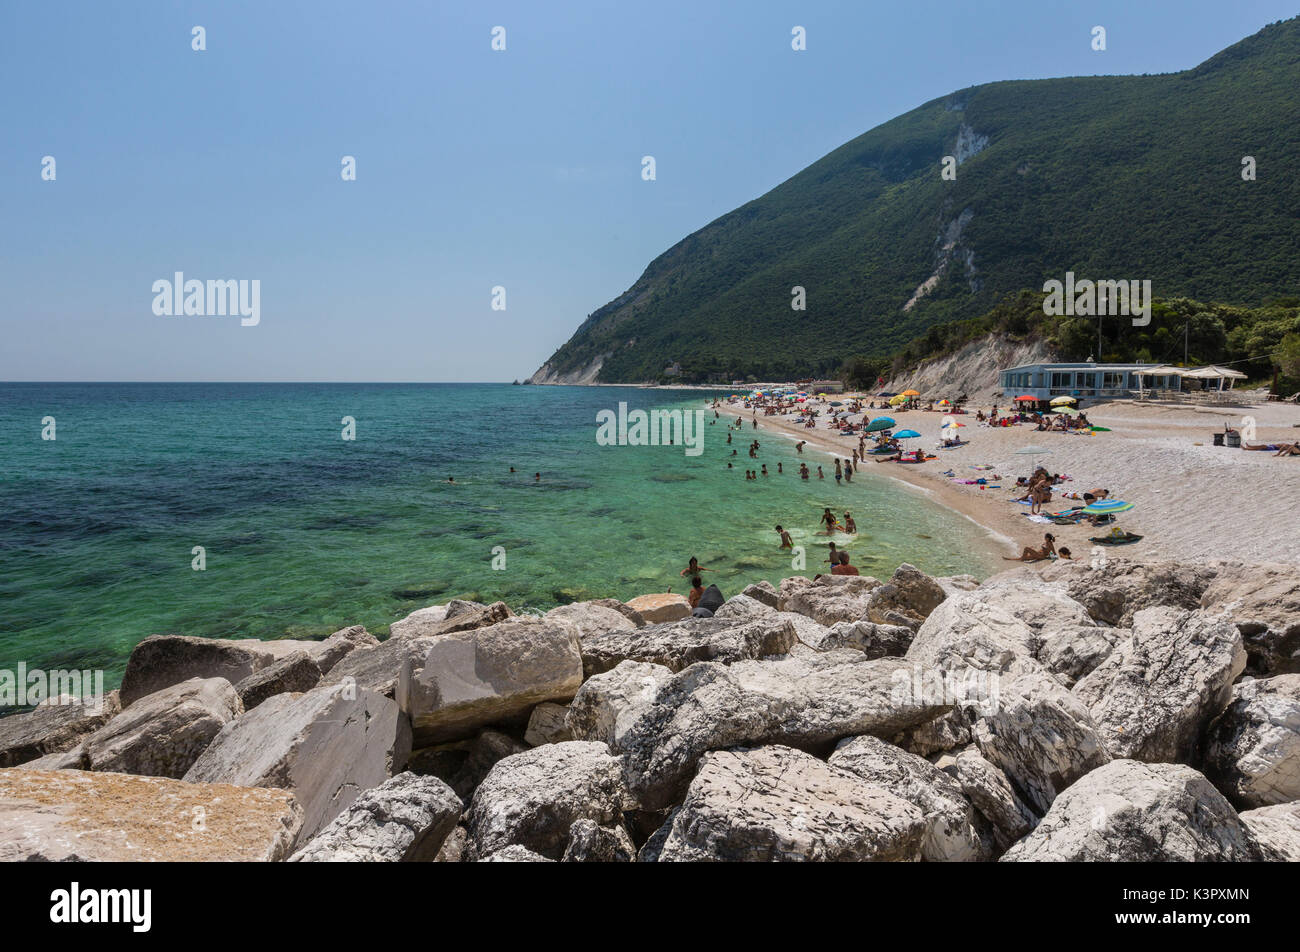 Tourists on the beach framed by the turquoise sea province of Ancona Conero Riviera Marche Italy Europe Stock Photo